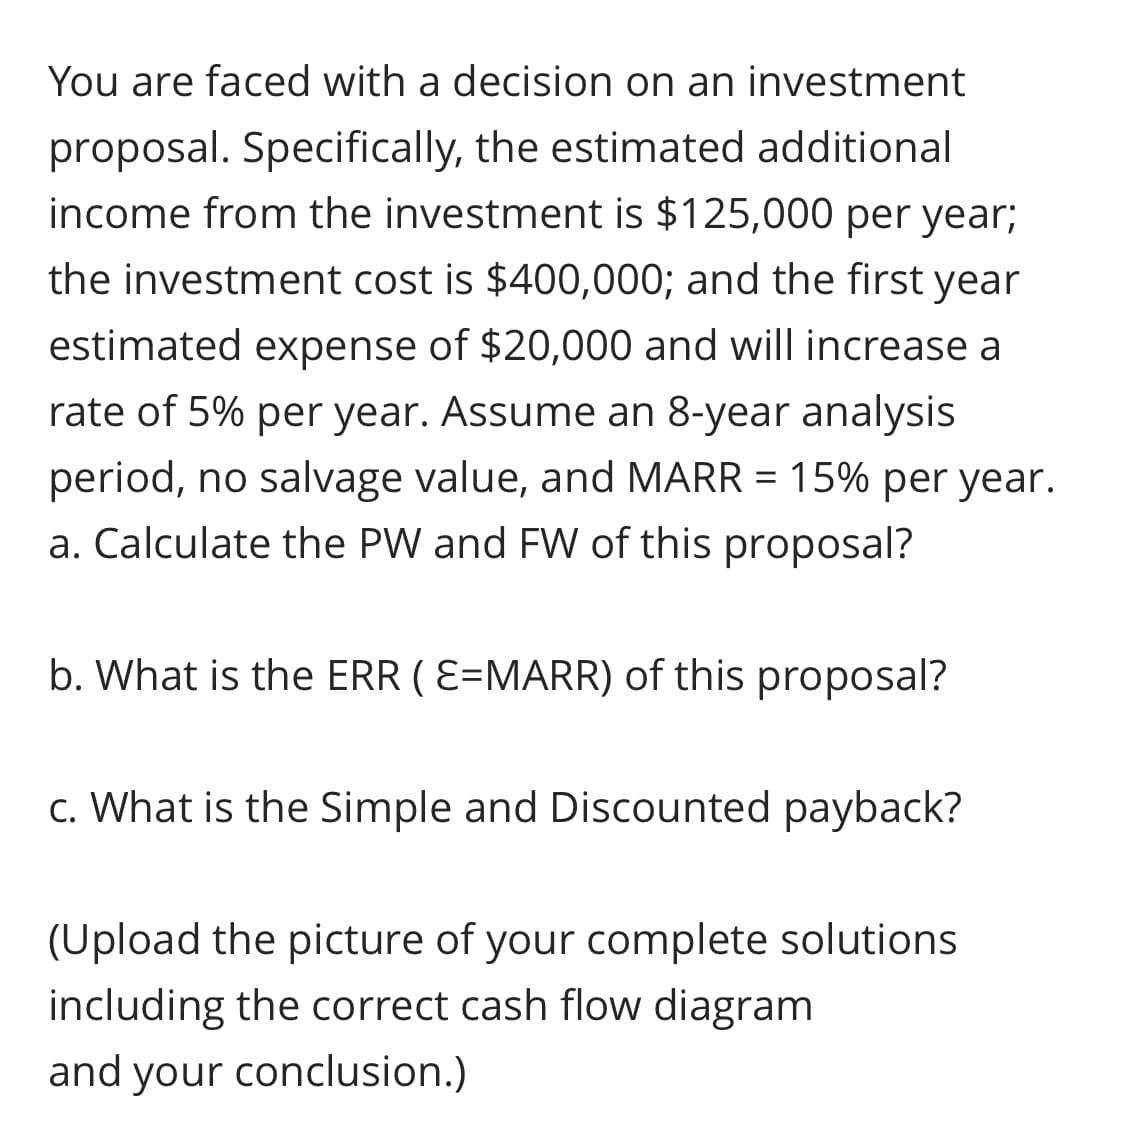 You are faced with a decision on an investment
proposal. Specifically, the estimated additional
income from the investment is $125,000 per year;
the investment cost is $400,000; and the first year
estimated expense of $20,000 and will increase a
rate of 5% per year. Assume an 8-year analysis
period, no salvage value, and MARR = 15% per year.
a. Calculate the PW and FW of this proposal?
b. What is the ERR ( E=MARR) of this proposal?
c. What is the Simple and Discounted payback?
(Upload the picture of your complete solutions
including the correct cash flow diagram
and your conclusion.)
